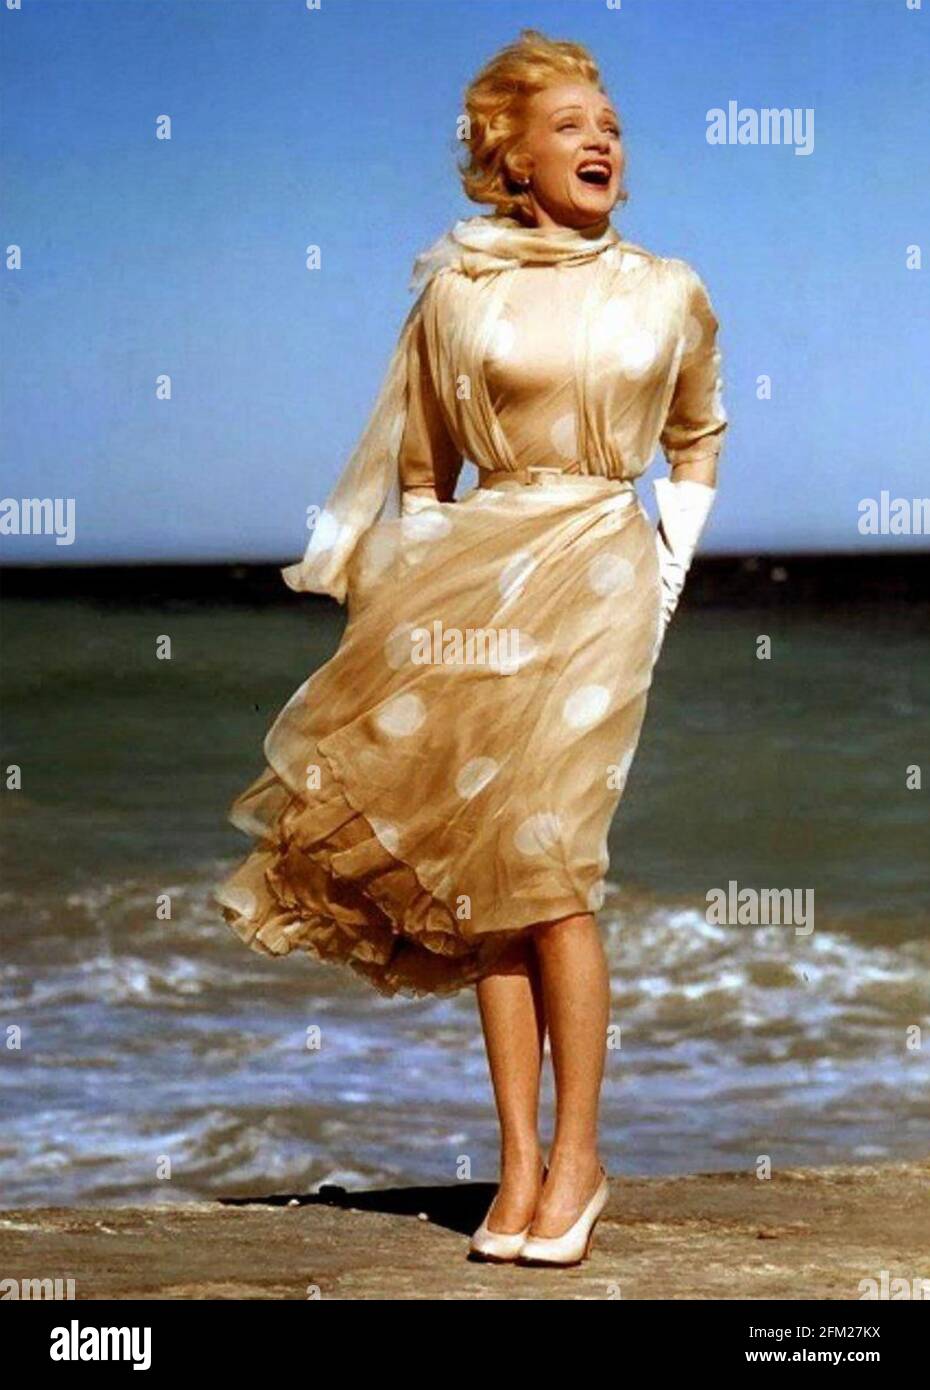 MARLENE DIETRICH (1901-1992) German-American film actress about 1965 on a beach in Cannes. Stock Photo